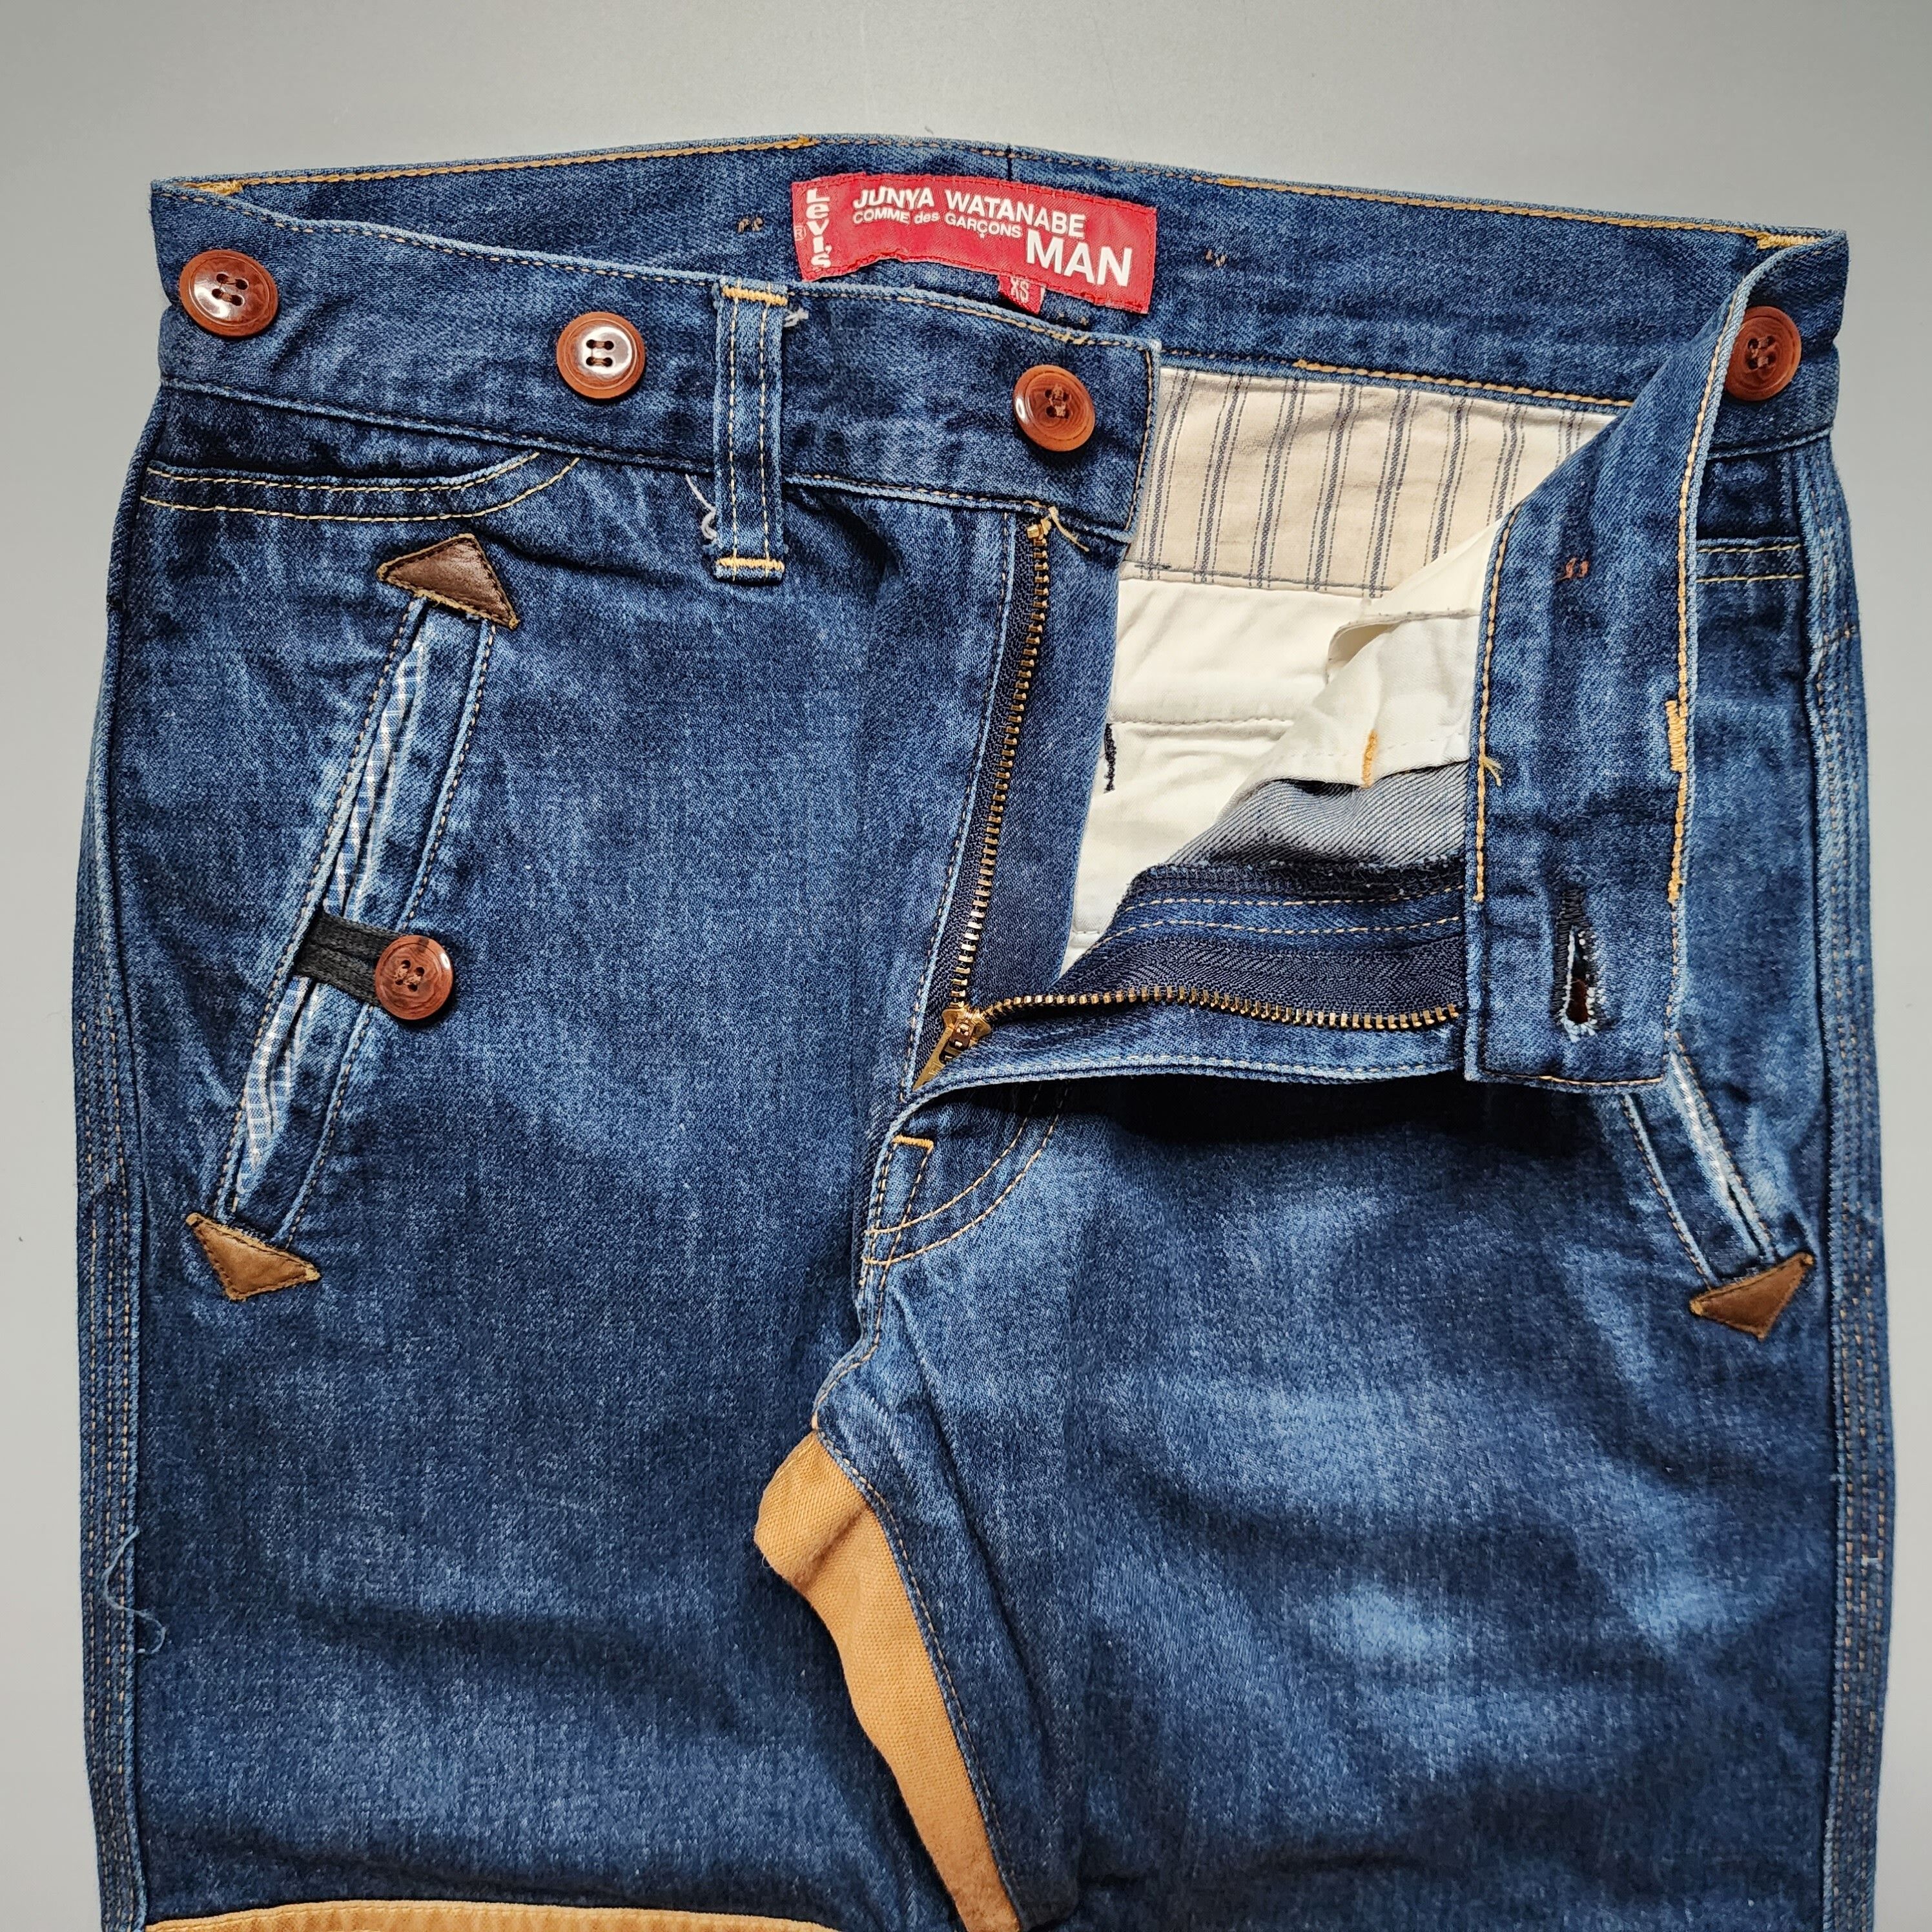 Junya Watanabe MAN- AW12 Contrast Patch Denim Cropped Jeans - 3